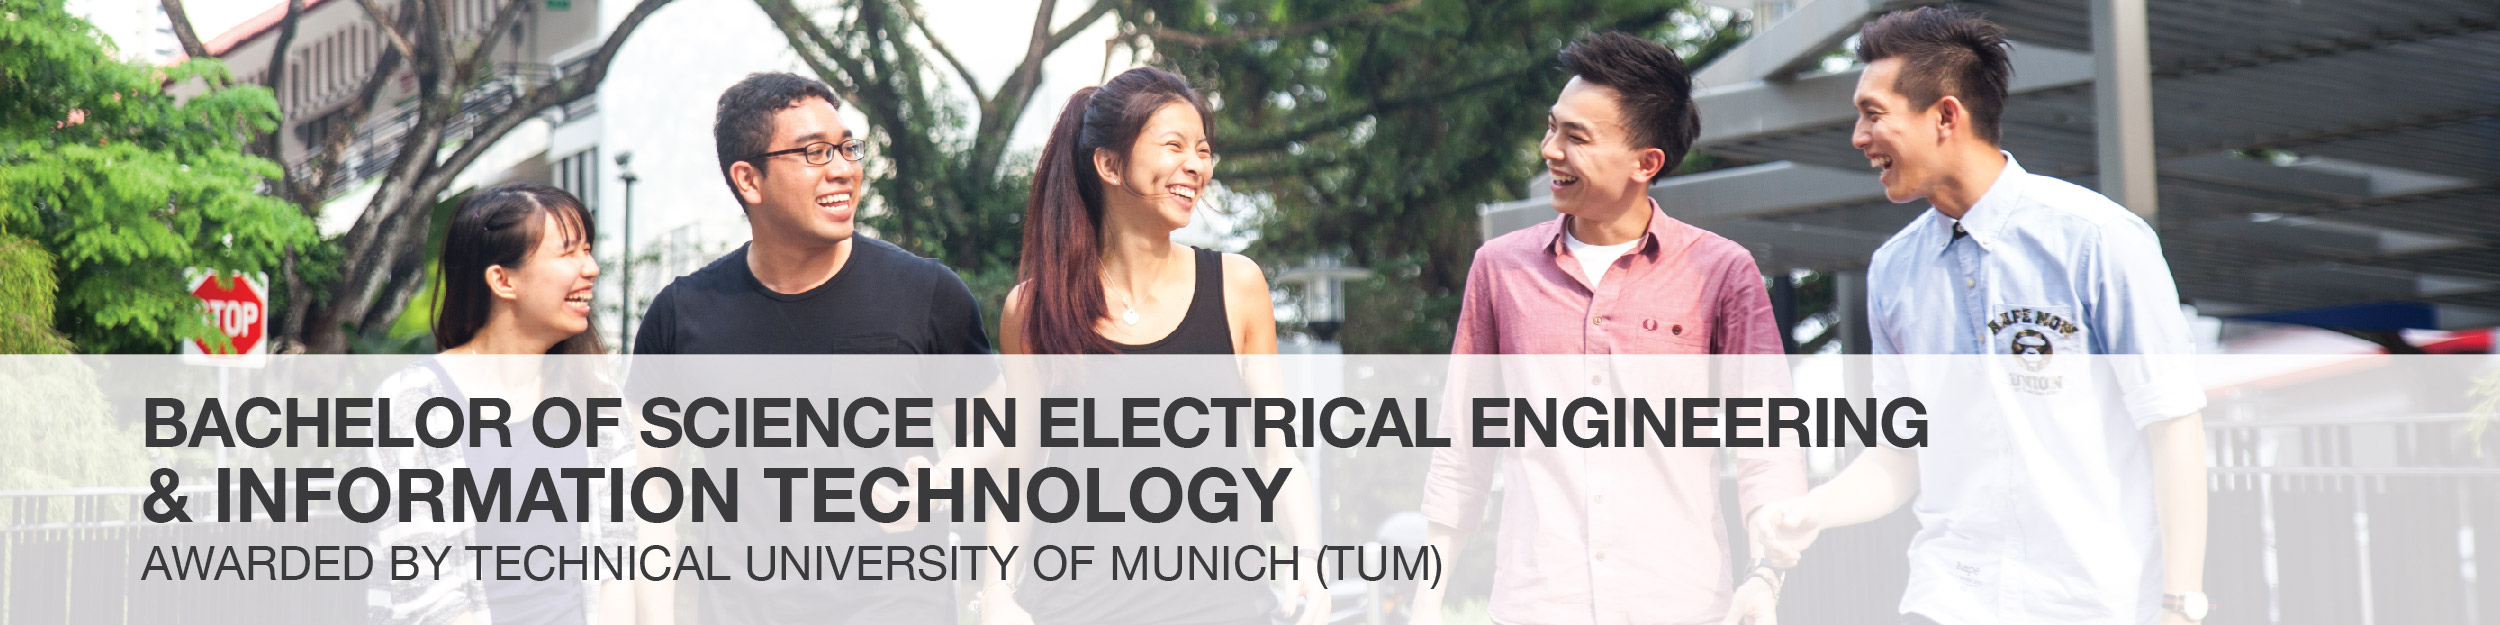 Bachelor of Science in Electrical Engineering & I.T. | TUM Asia